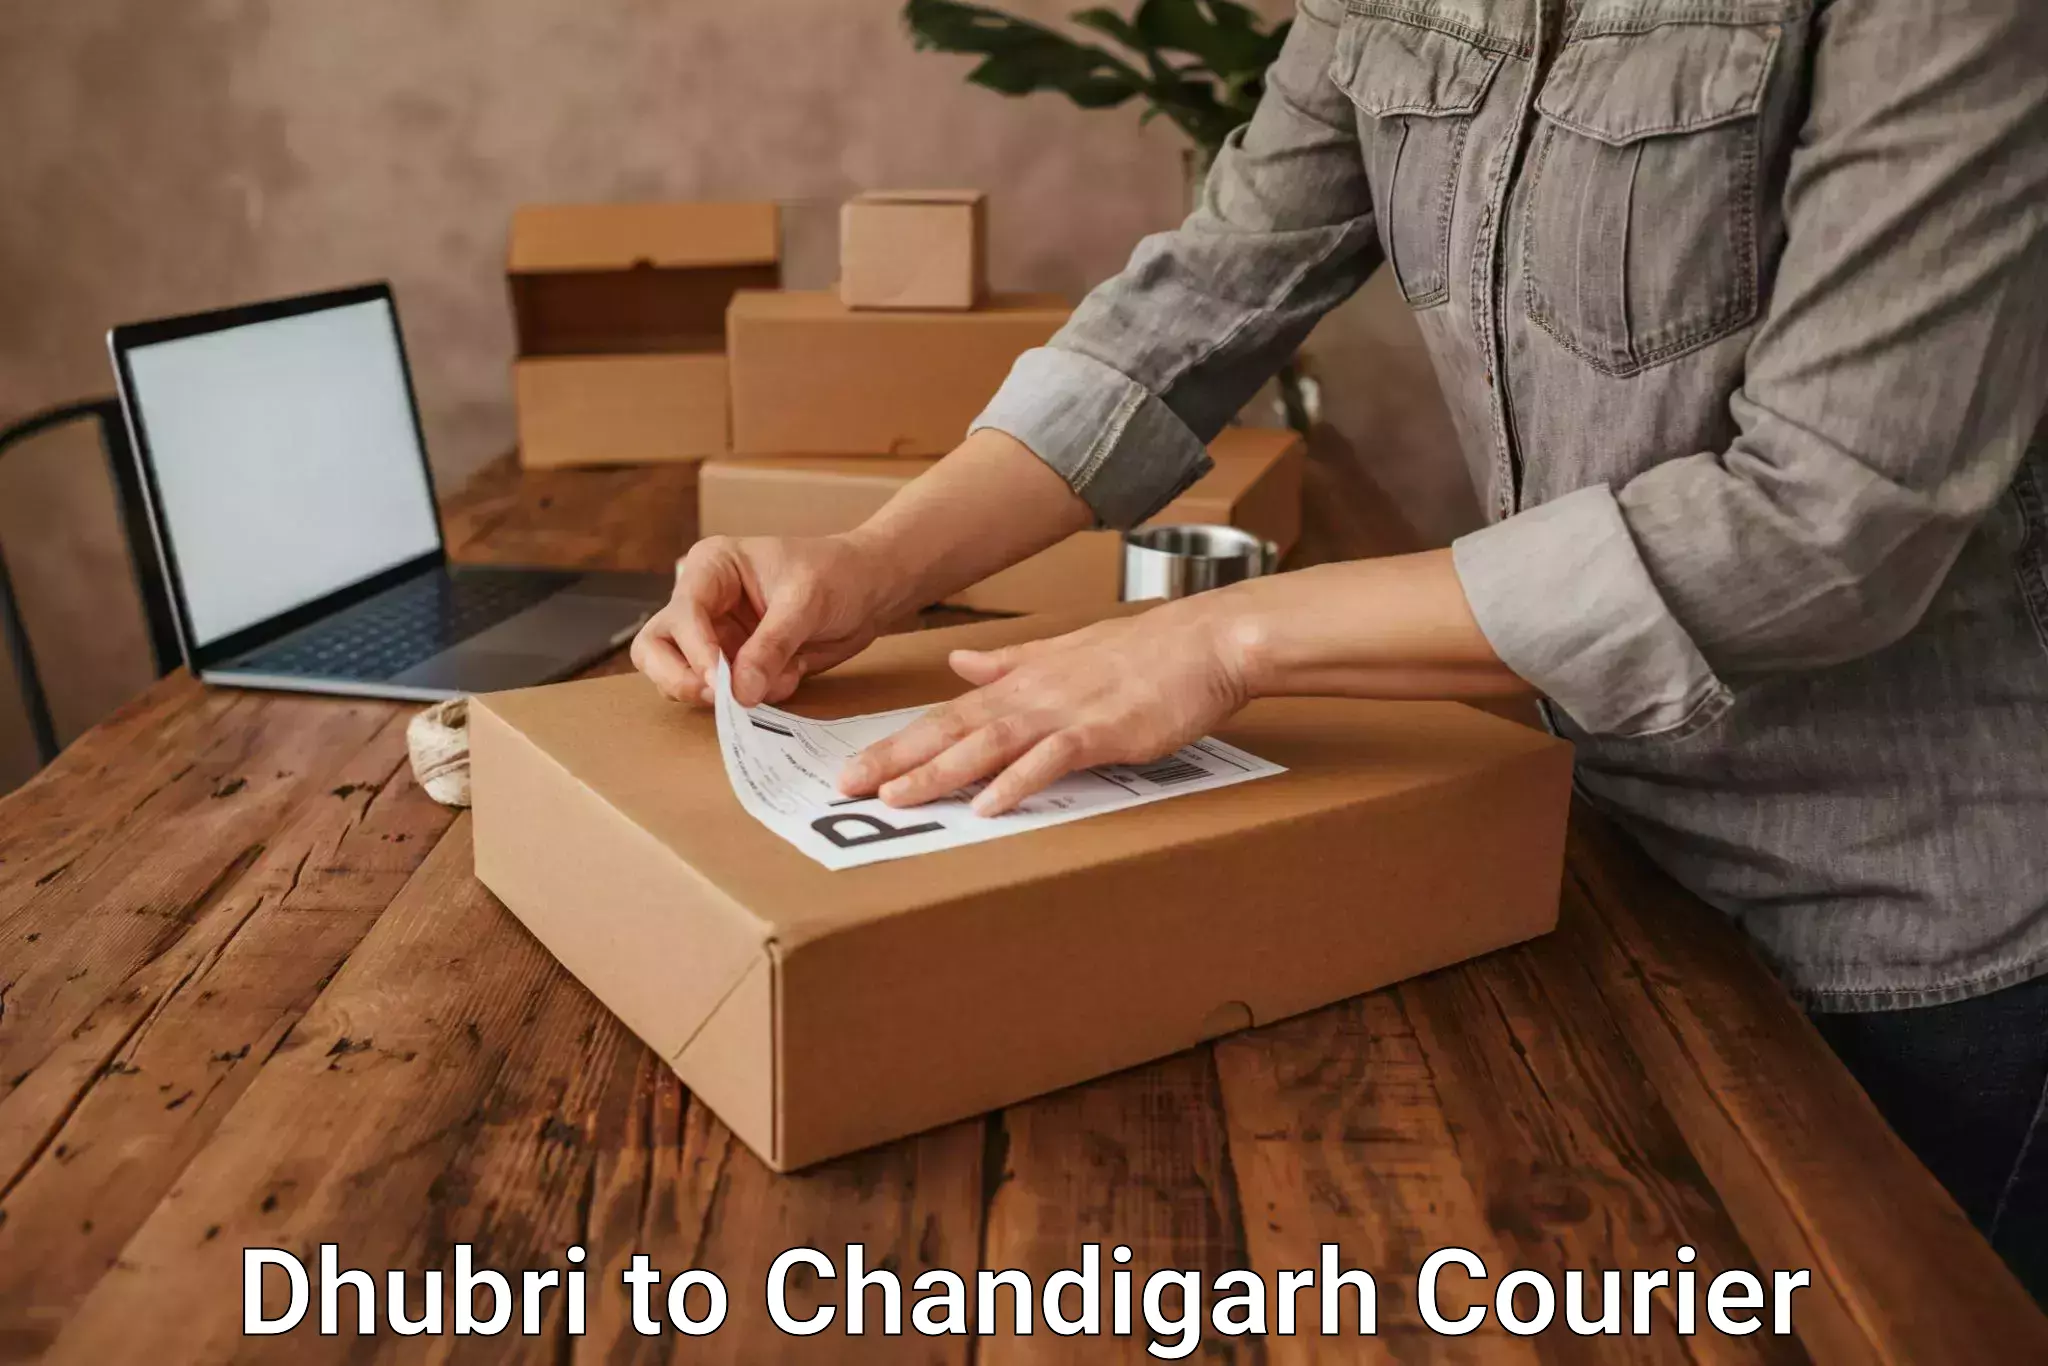 Subscription-based courier Dhubri to Chandigarh